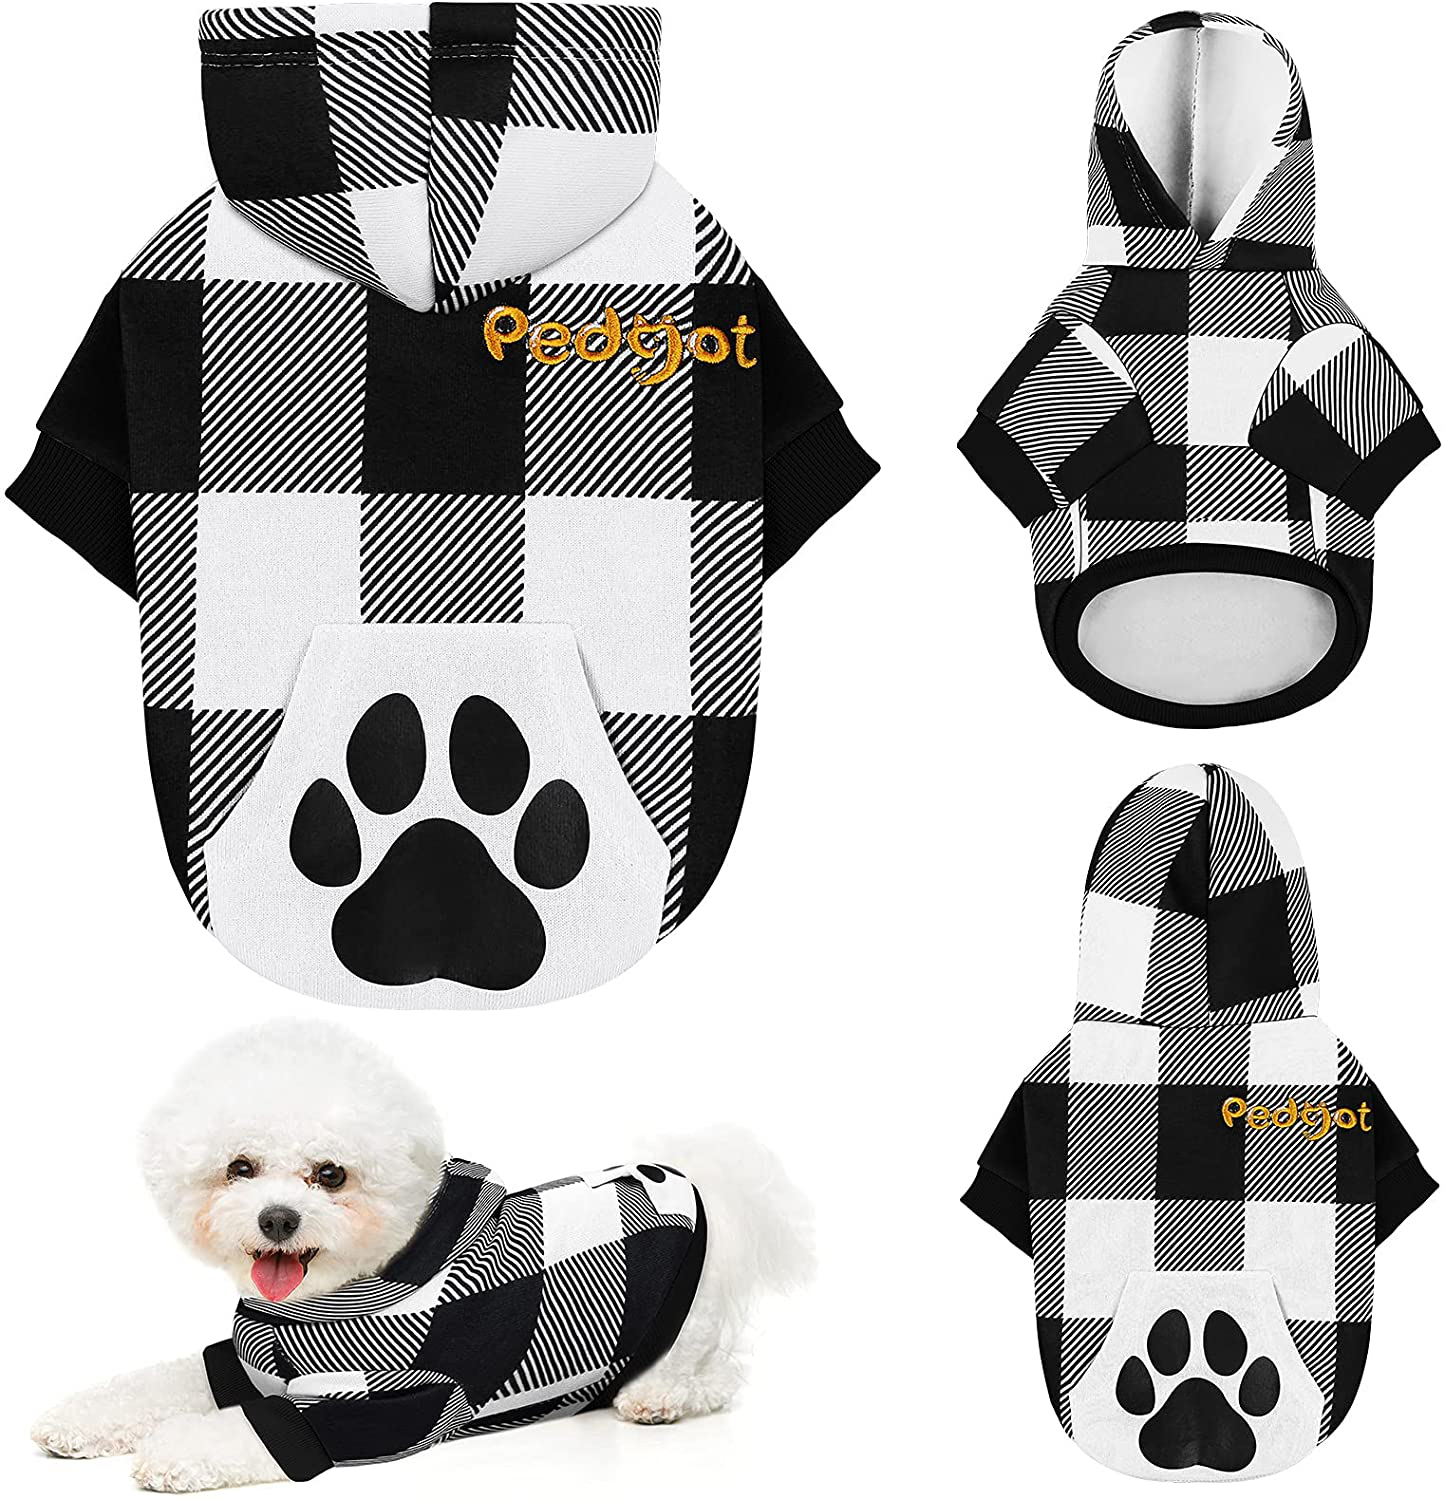 Pedgot Plaid Dog Hoodie Pet Clothes with Hat Pet Sweaters for Dogs Puppies Cats Clothes with Dog Footprints Patterns Pocket, Warm, Soft and Breathable Animals & Pet Supplies > Pet Supplies > Dog Supplies > Dog Apparel Pedgot Black and White Large 